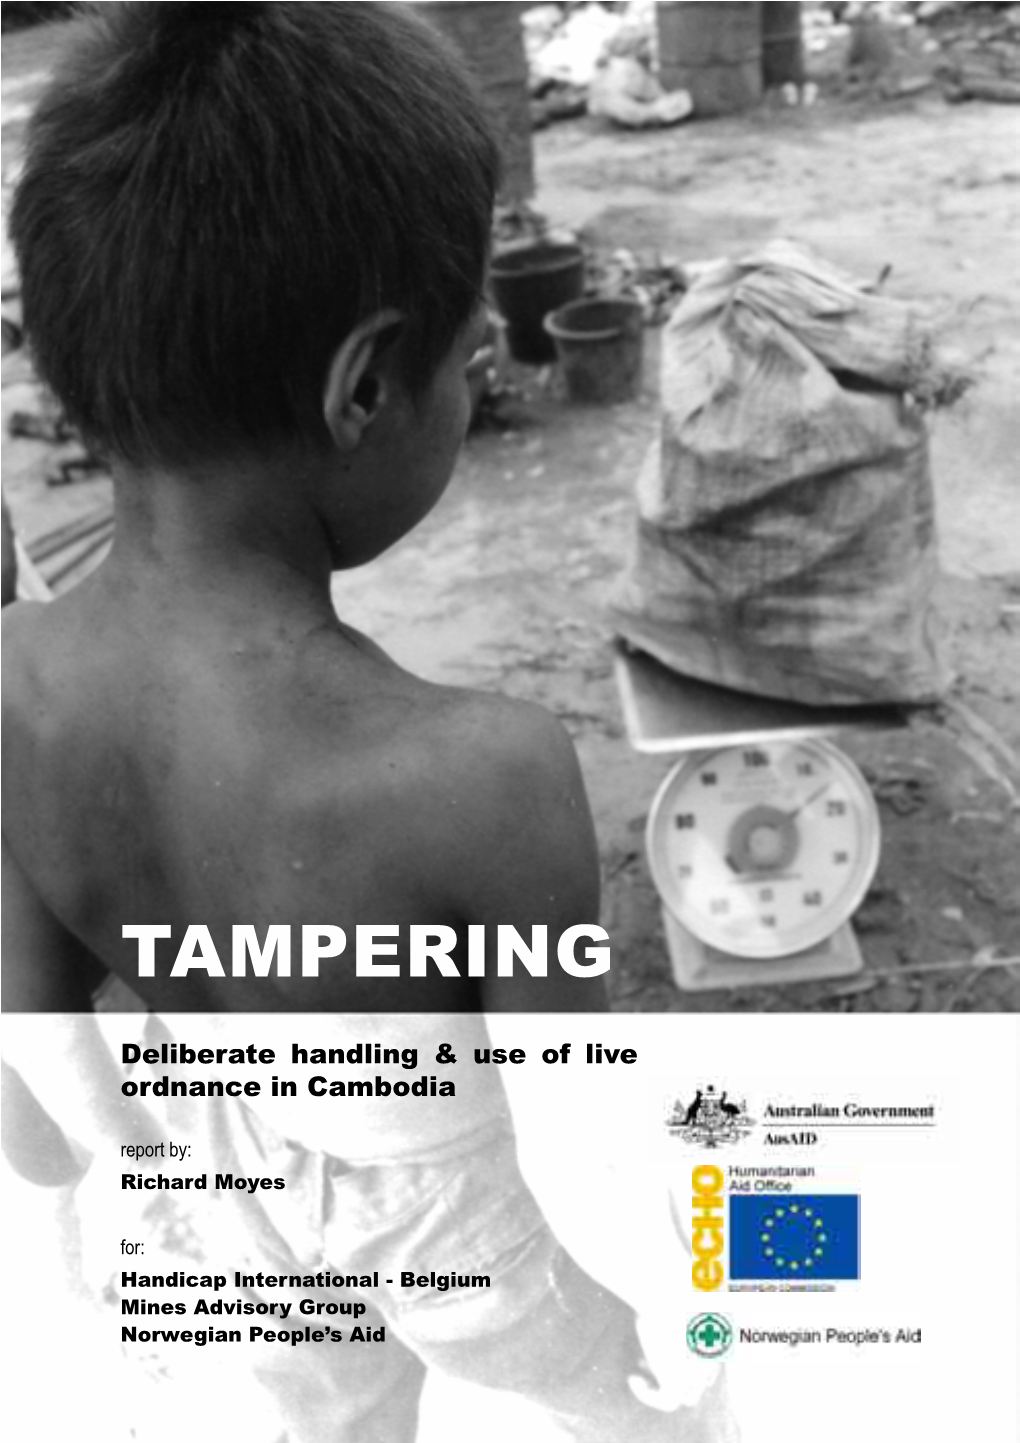 Tampering: Deliberate Handling & Use of Live Ordnance in Cambodia